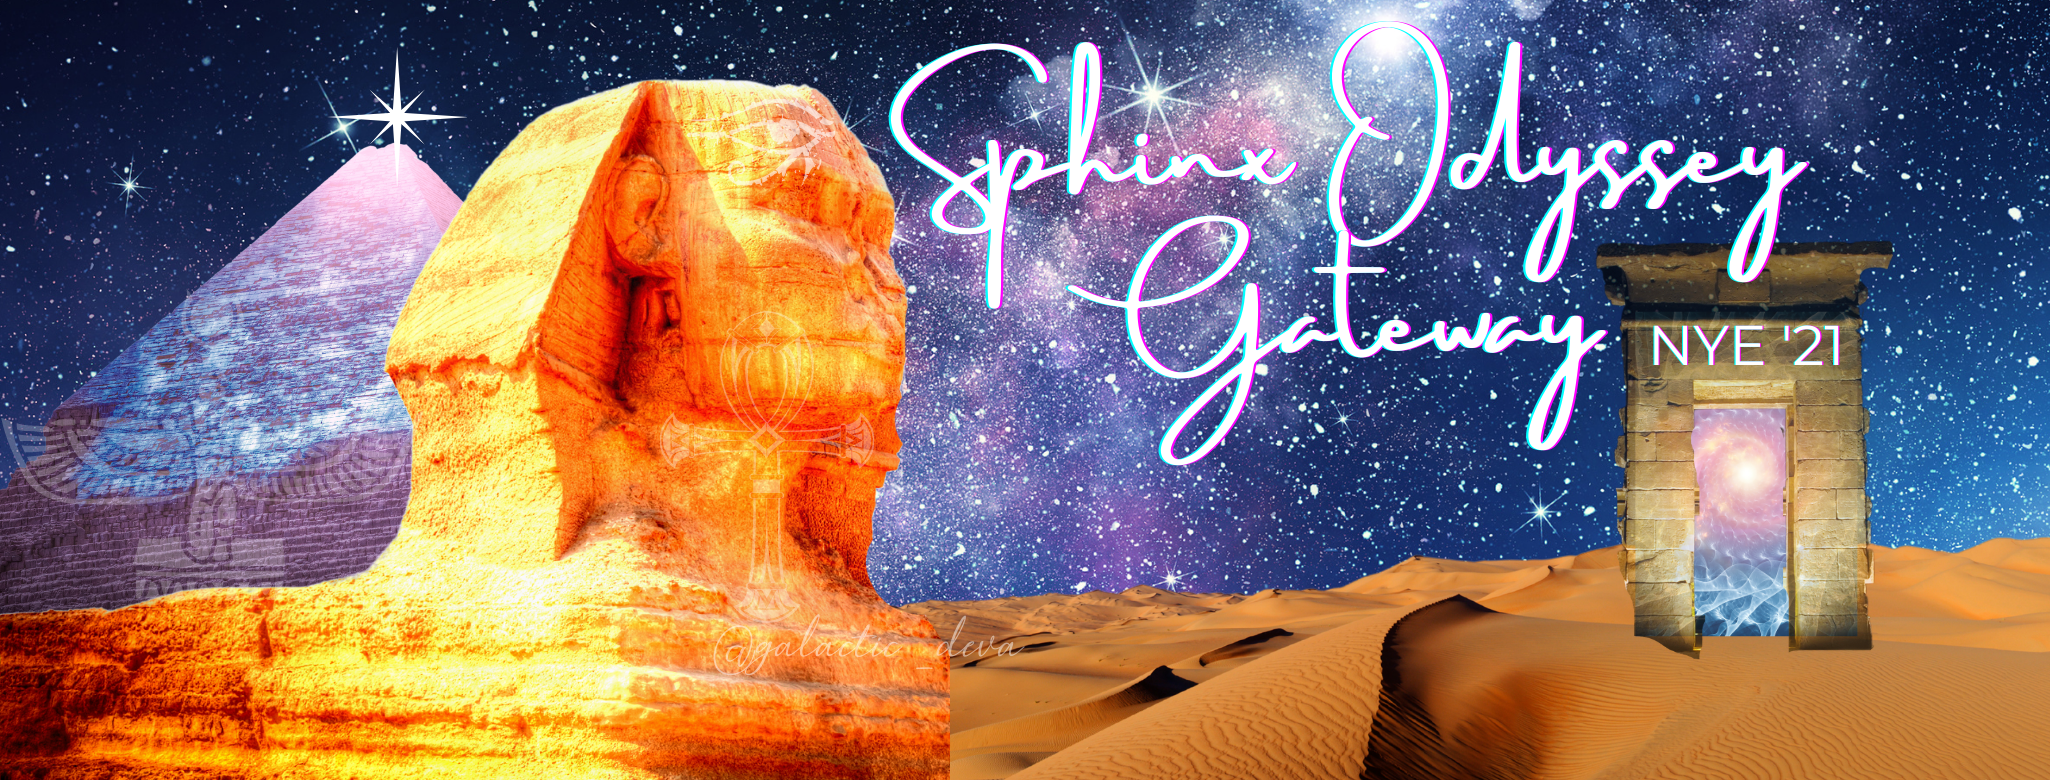 You are currently viewing The Sphinx Odyssey Gateway NYE’21